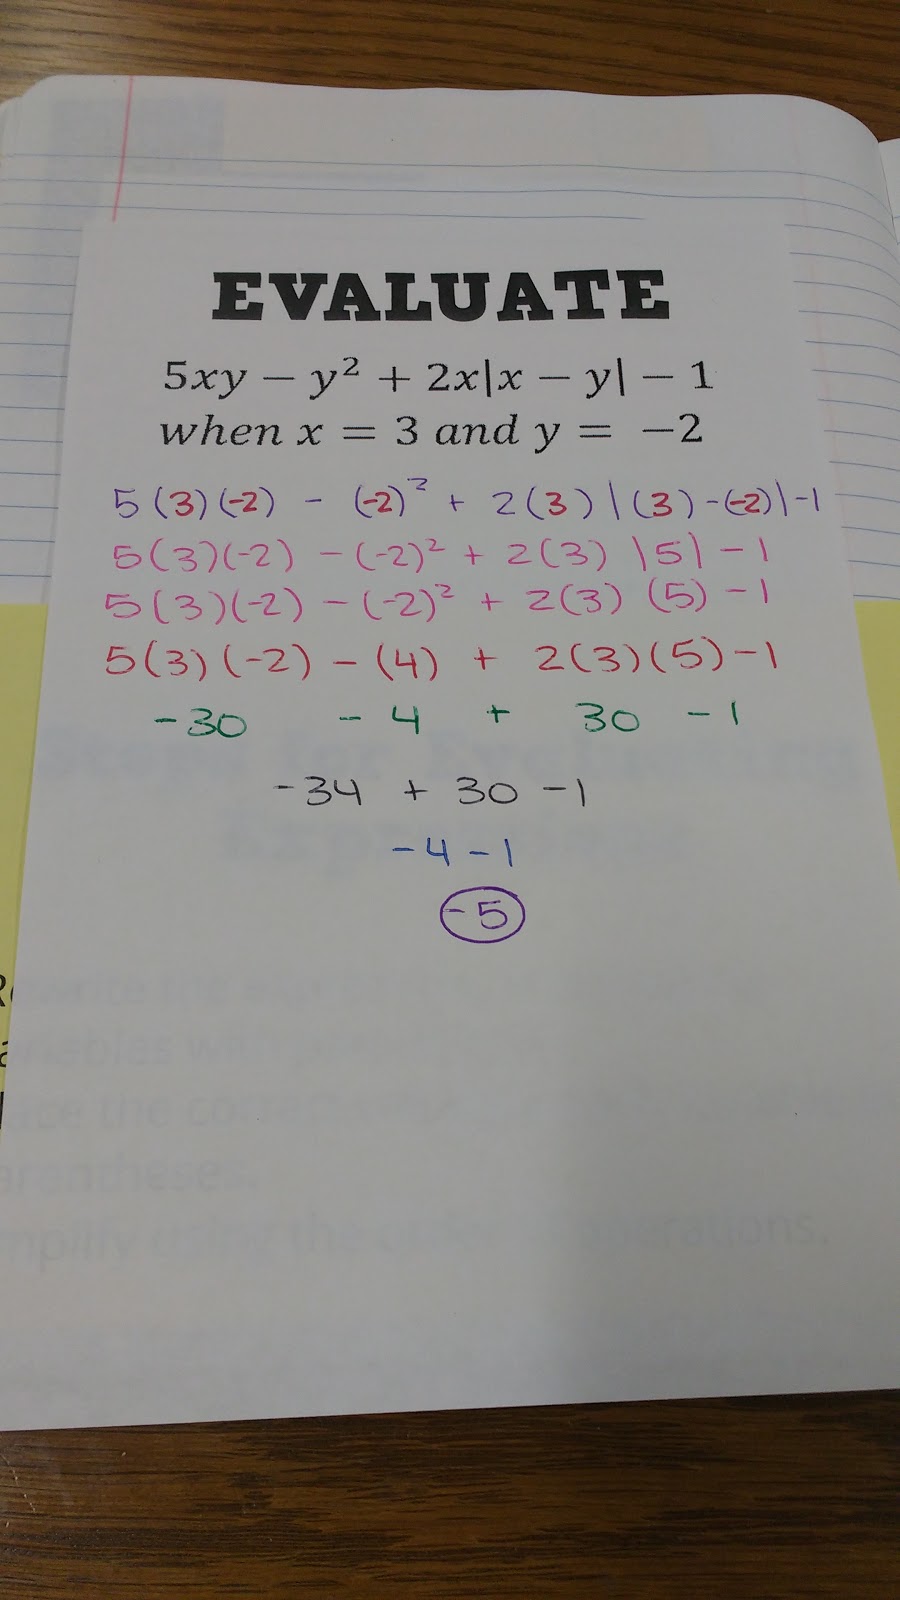 evaluating expressions practice problems with pocket